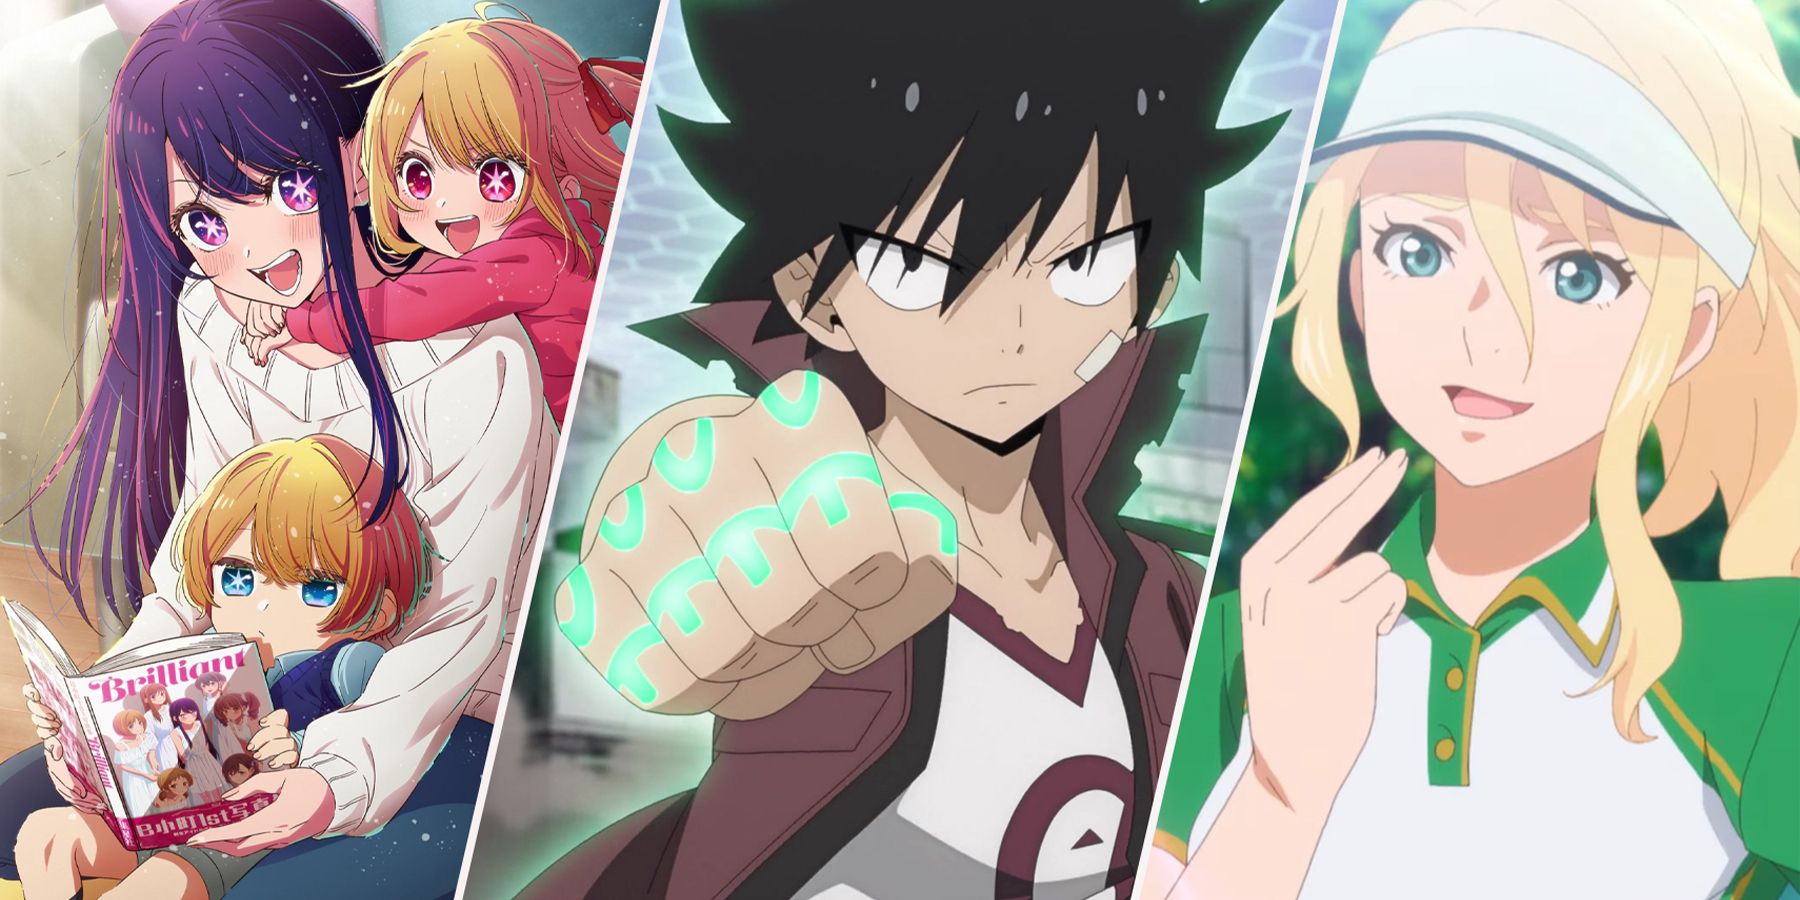 What You Need To Know About The Spring 2023 Anime Season